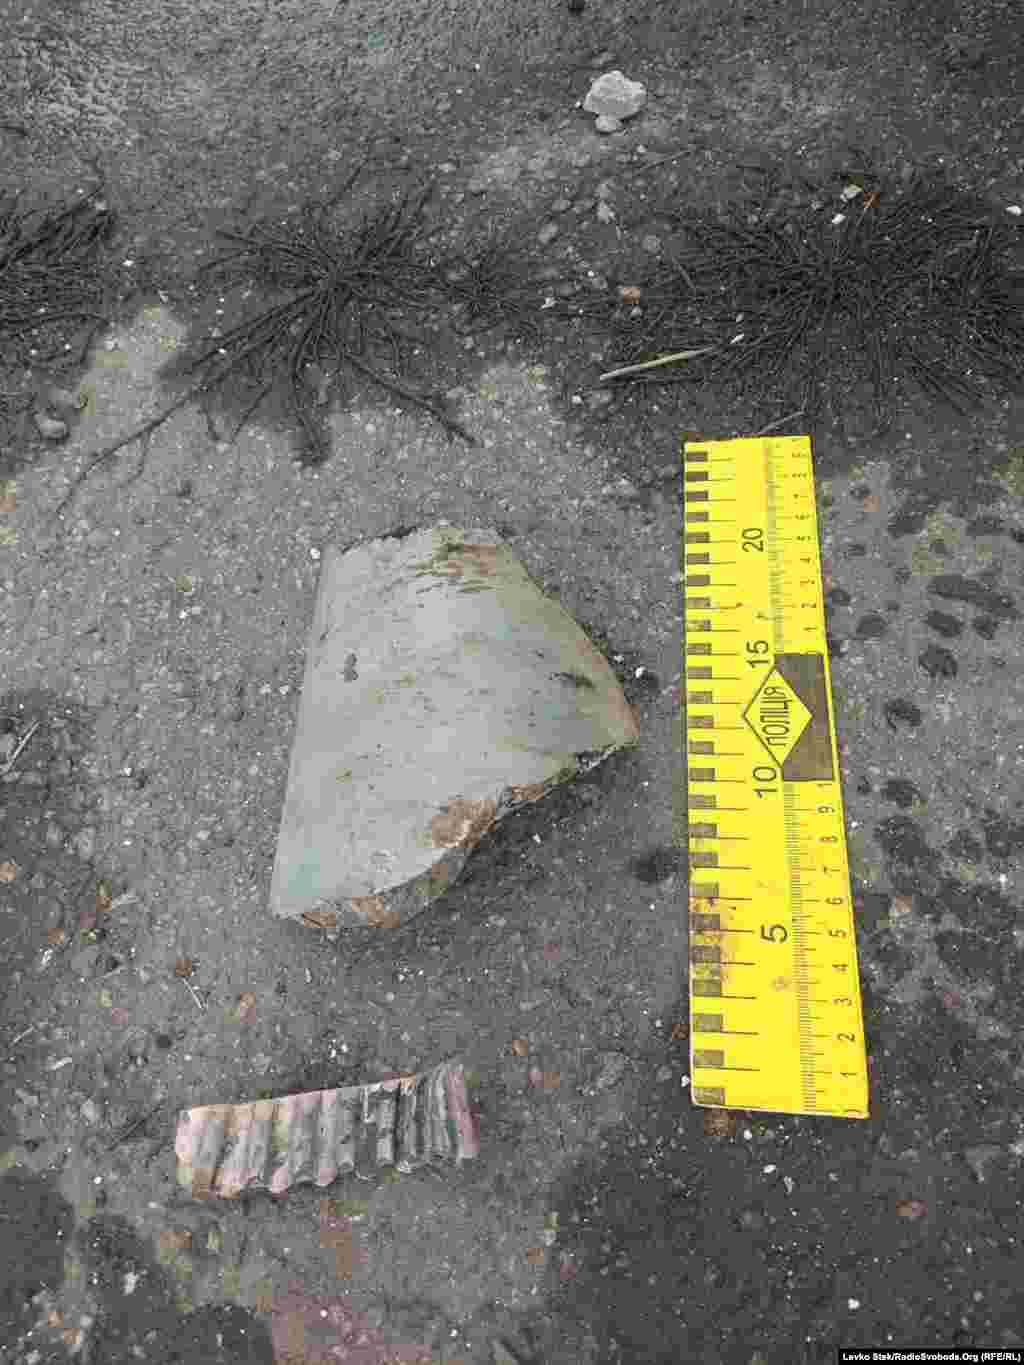 A large shell fragment near the school.